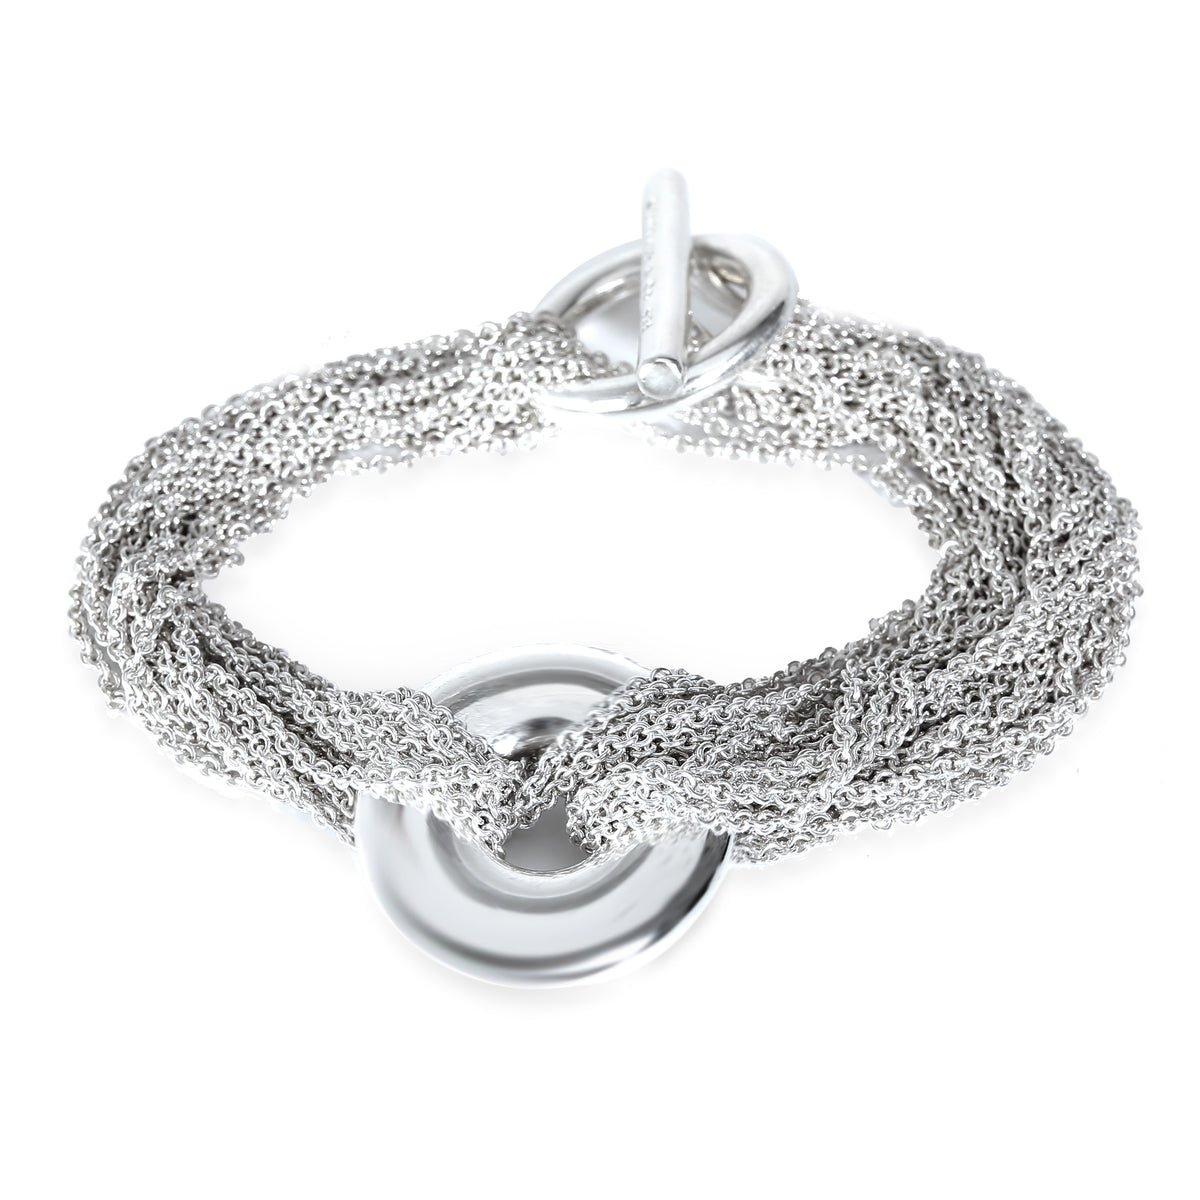 Multi-Strand Bracelet in Sterling Silver with Toggle Clasp